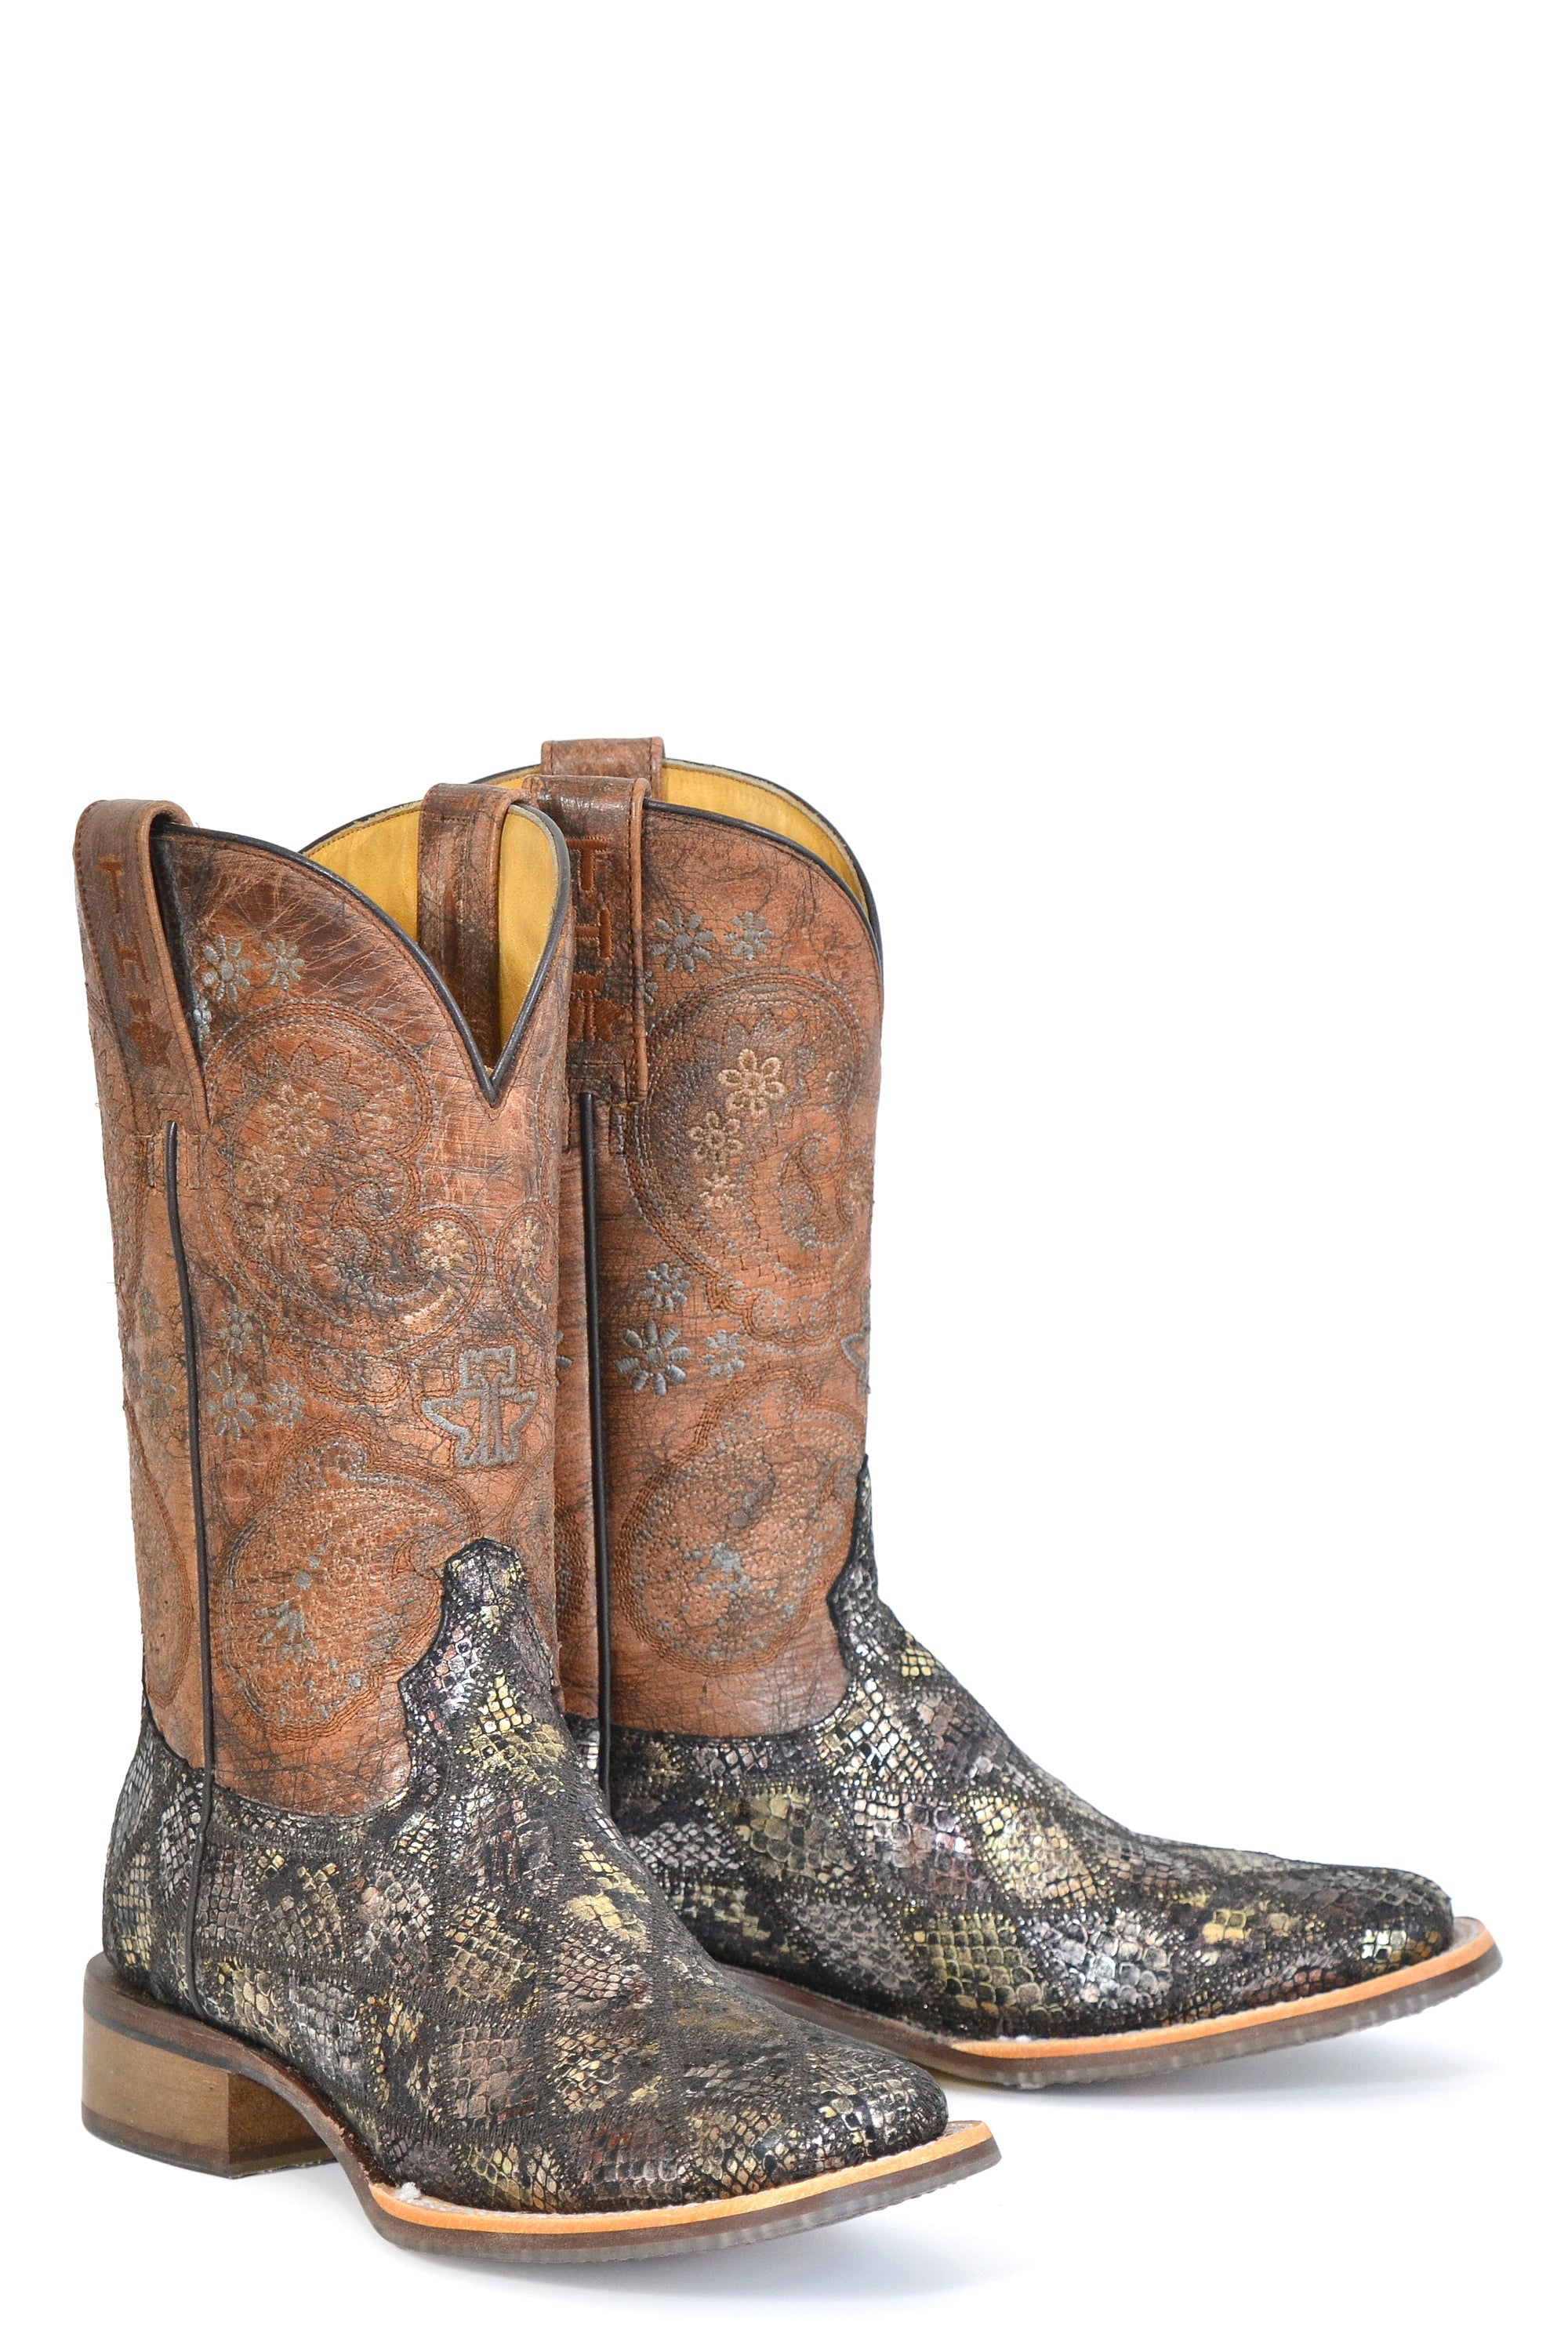 Tin Haul WOMENS PAISLEY PYTHON WITH COUNTRY ROAD SOLE